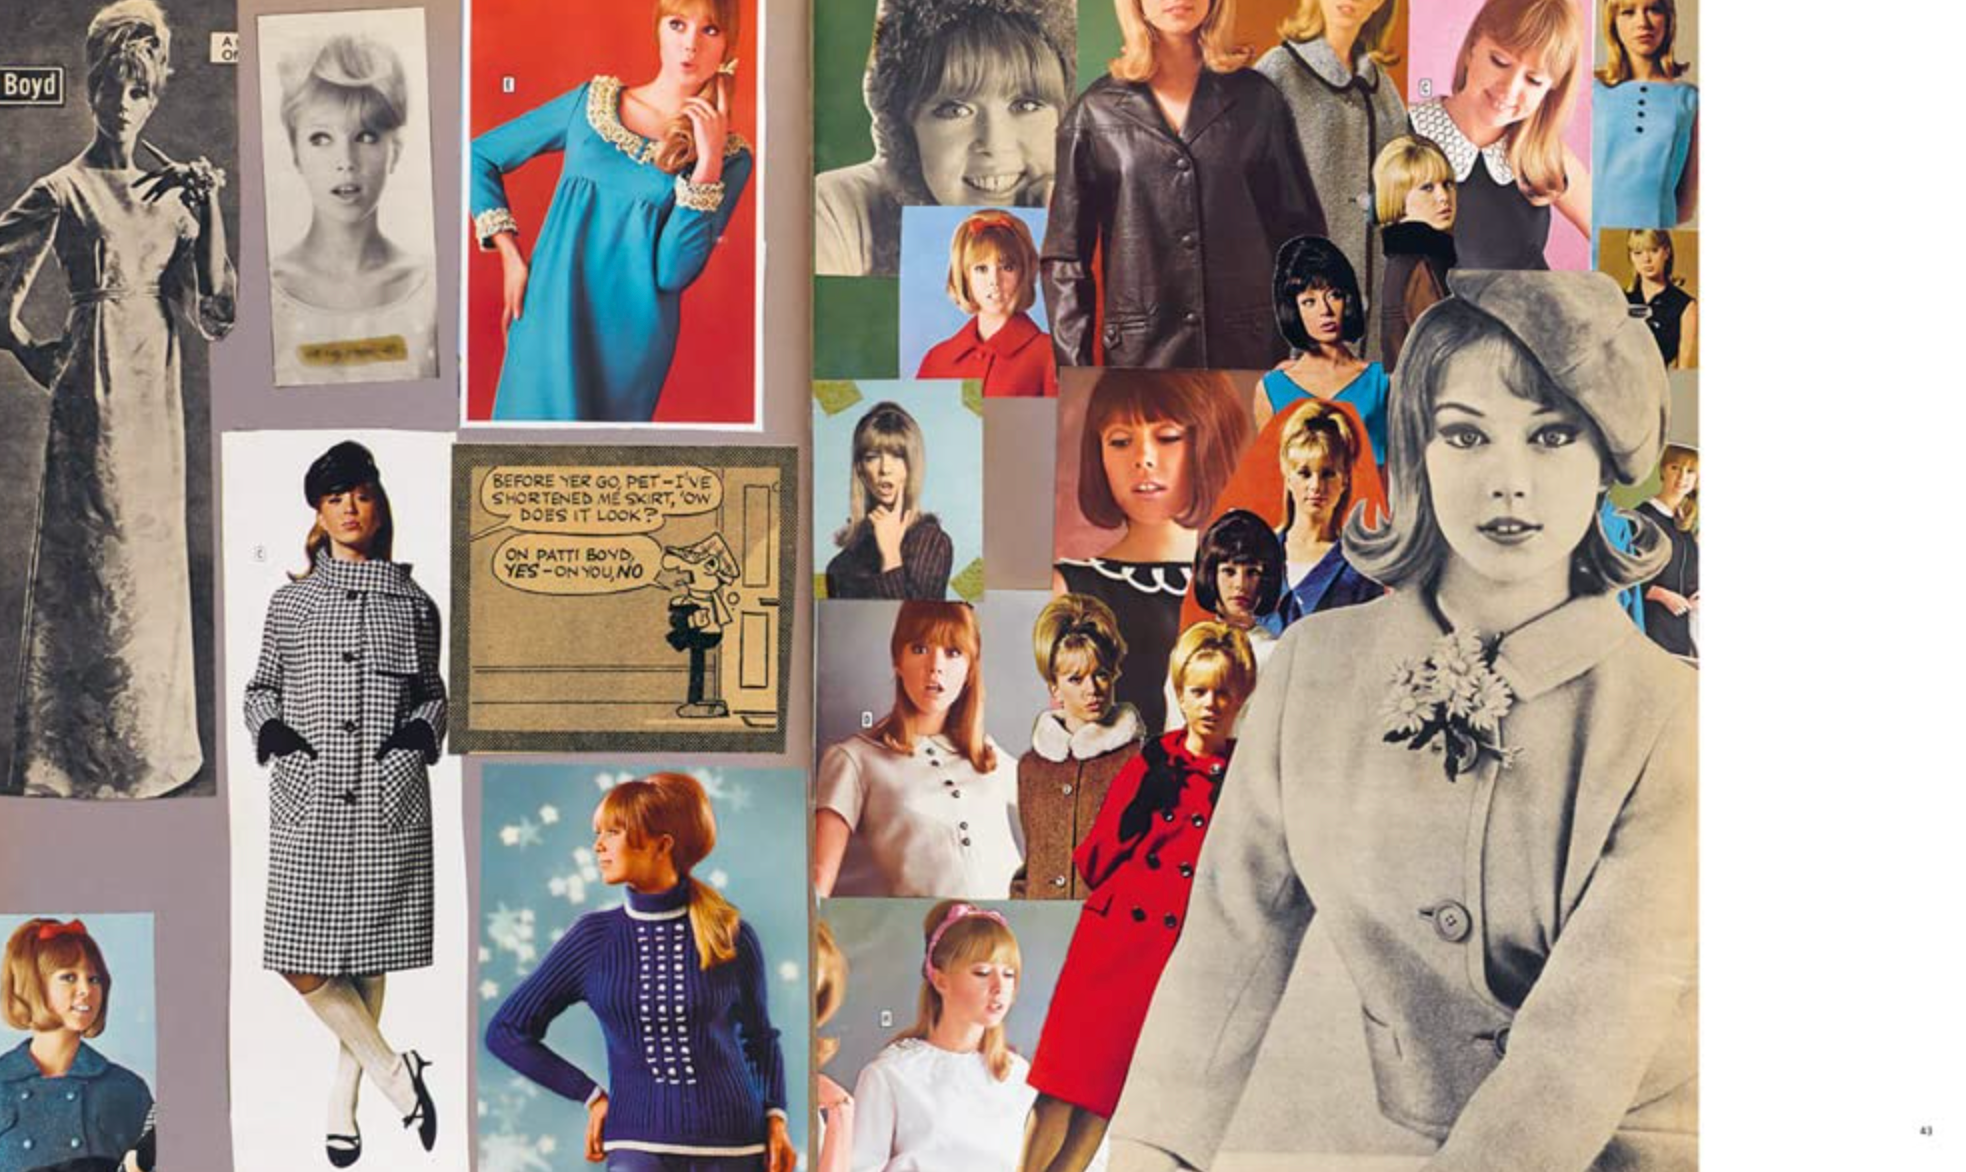 Patty Boyd: My Life in Pictures